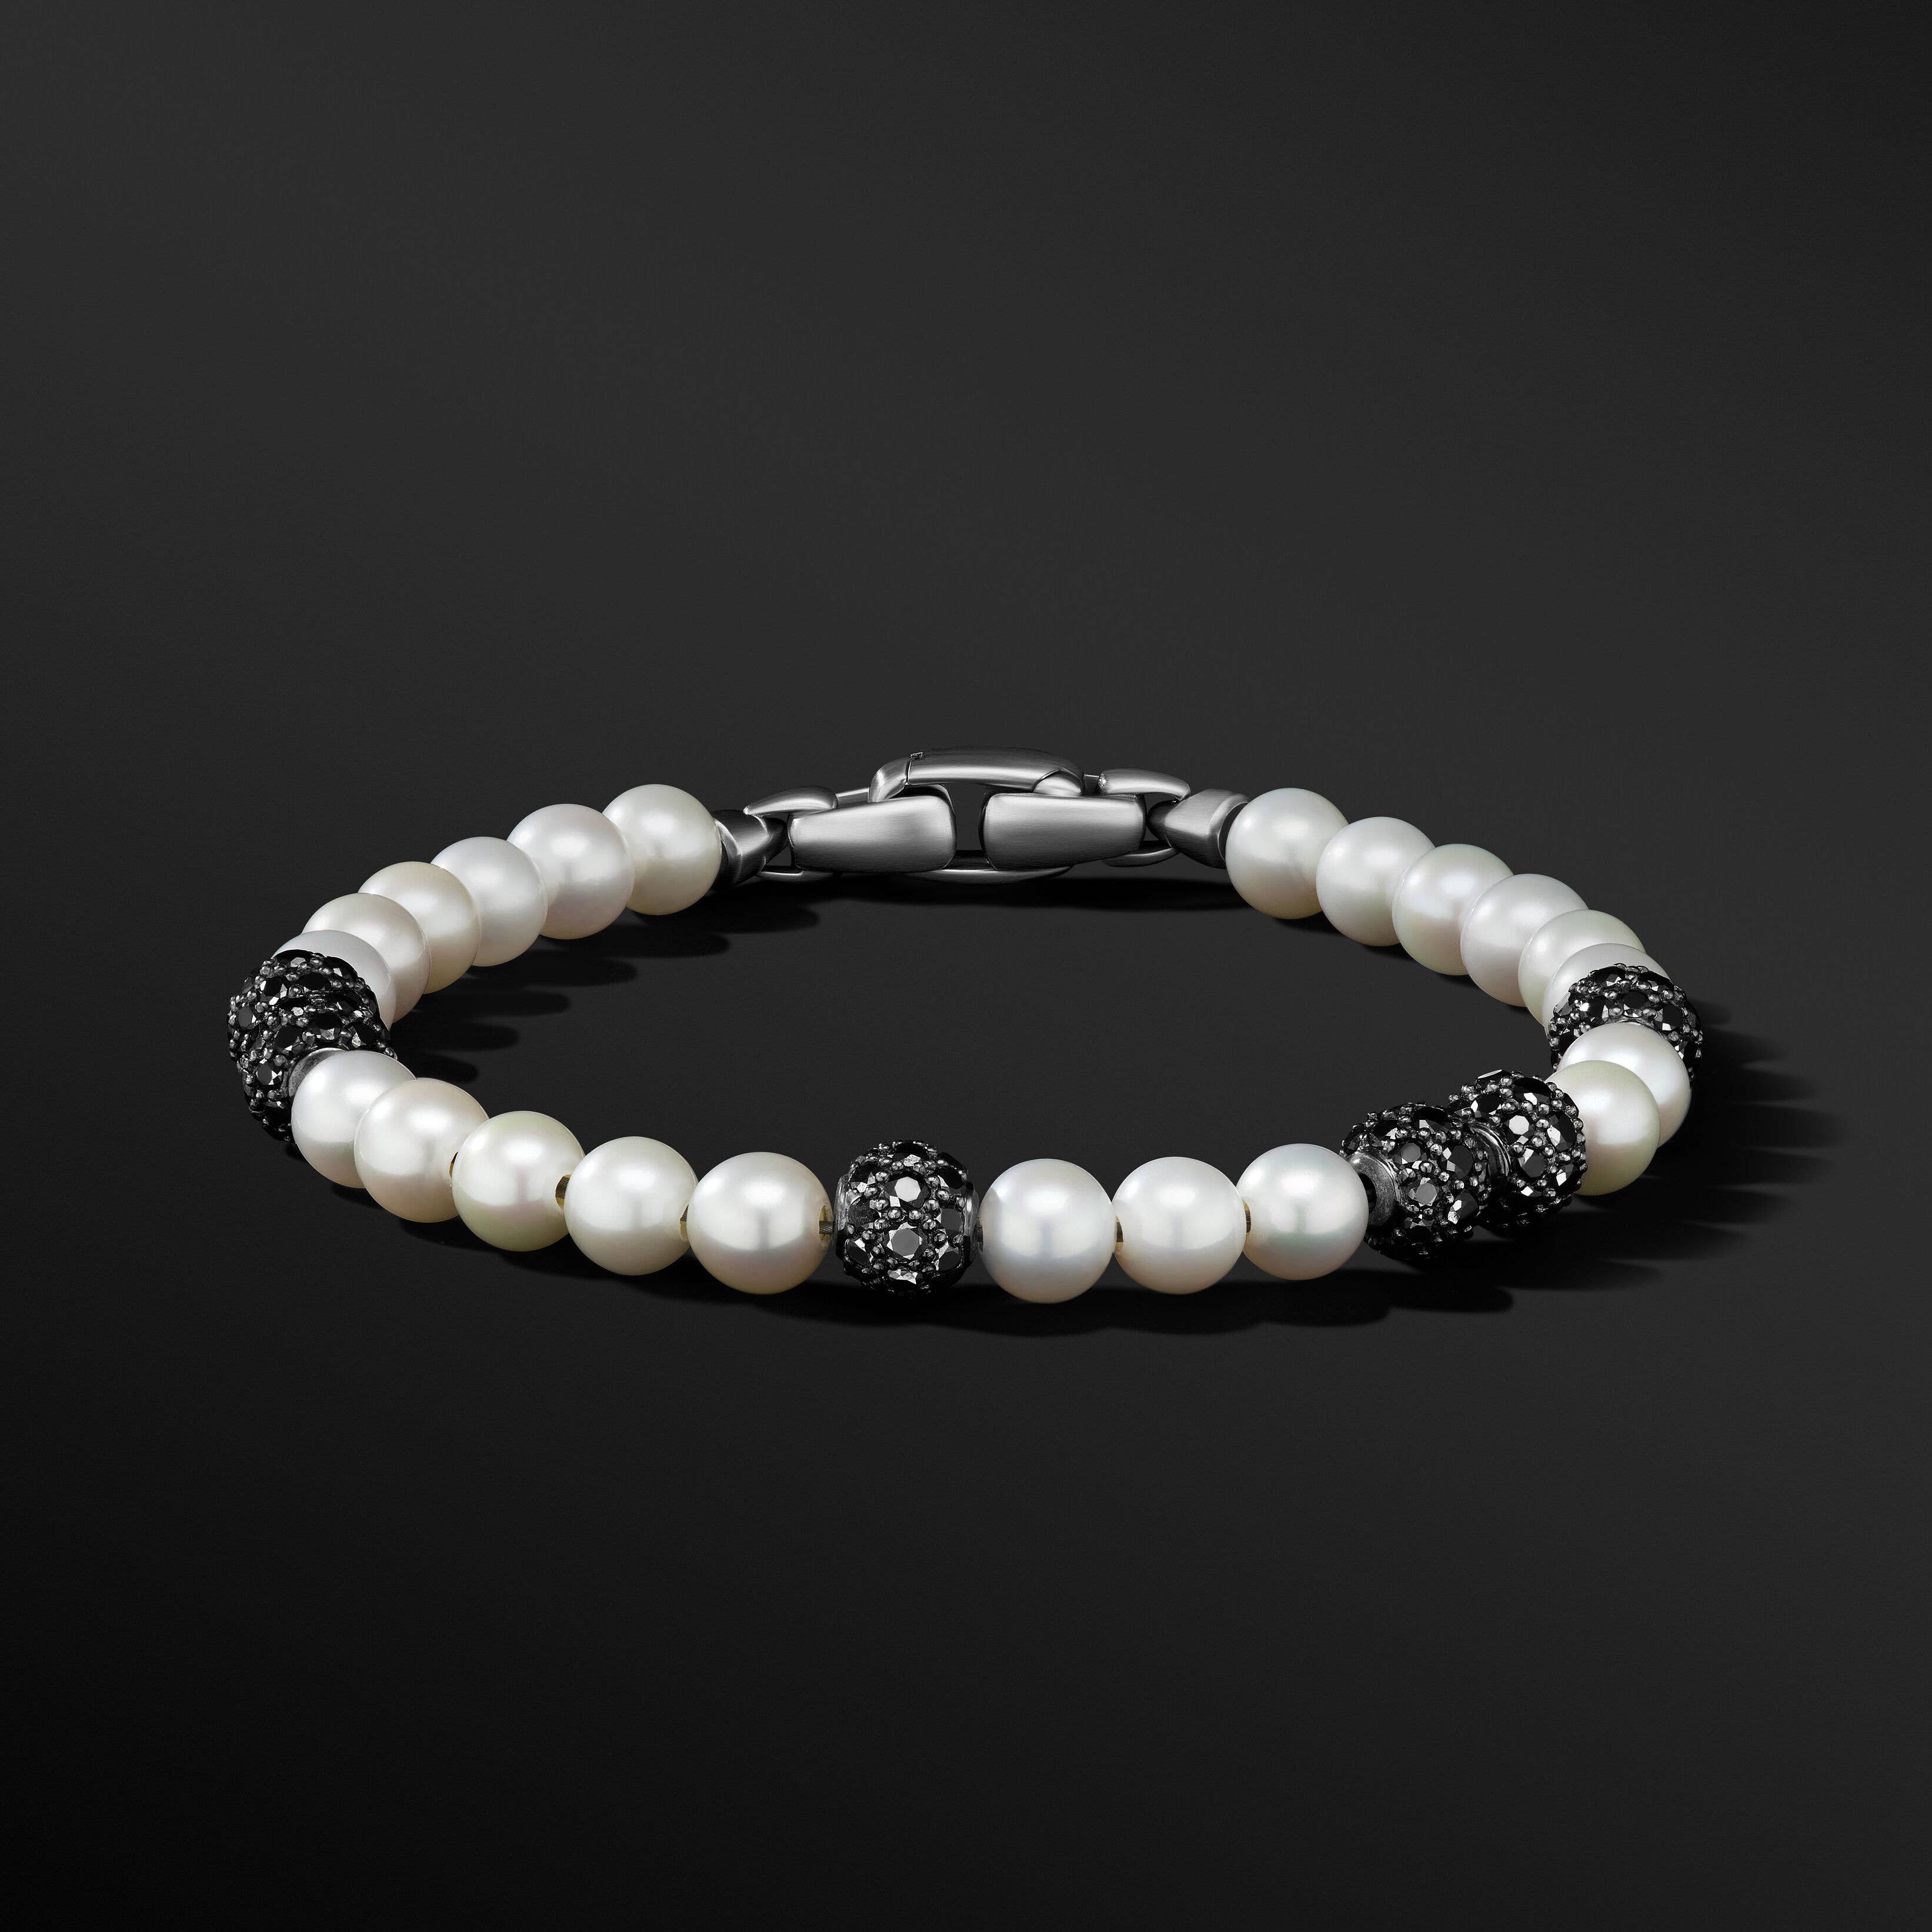 Spiritual Beads Bracelet in Sterling Silver with Pearls and Pavé Black Diamonds